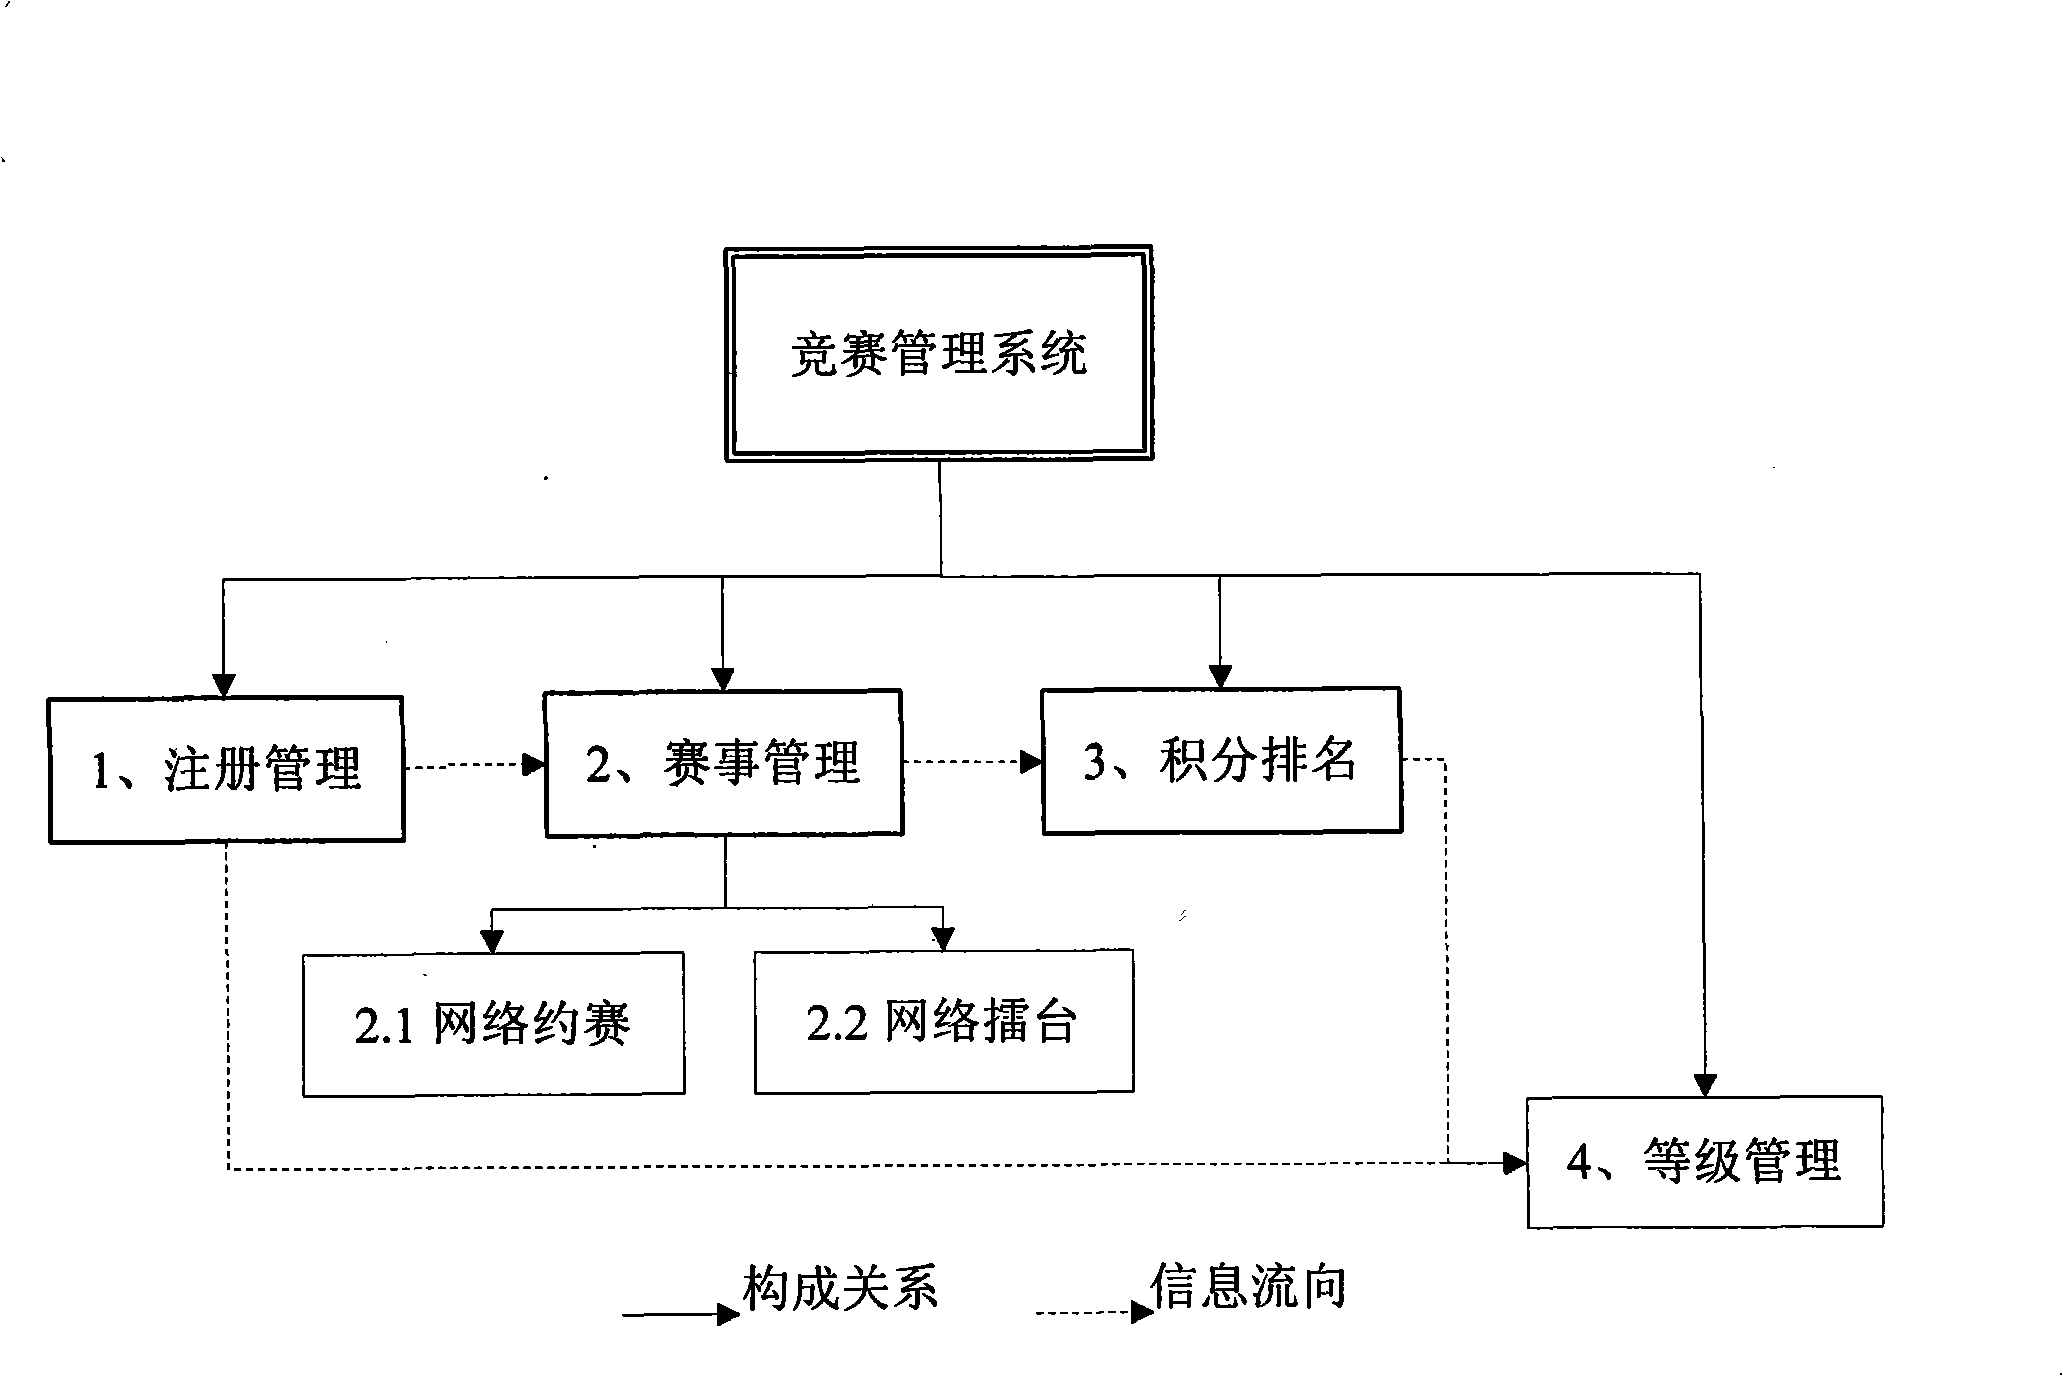 Competition management system and method based on network